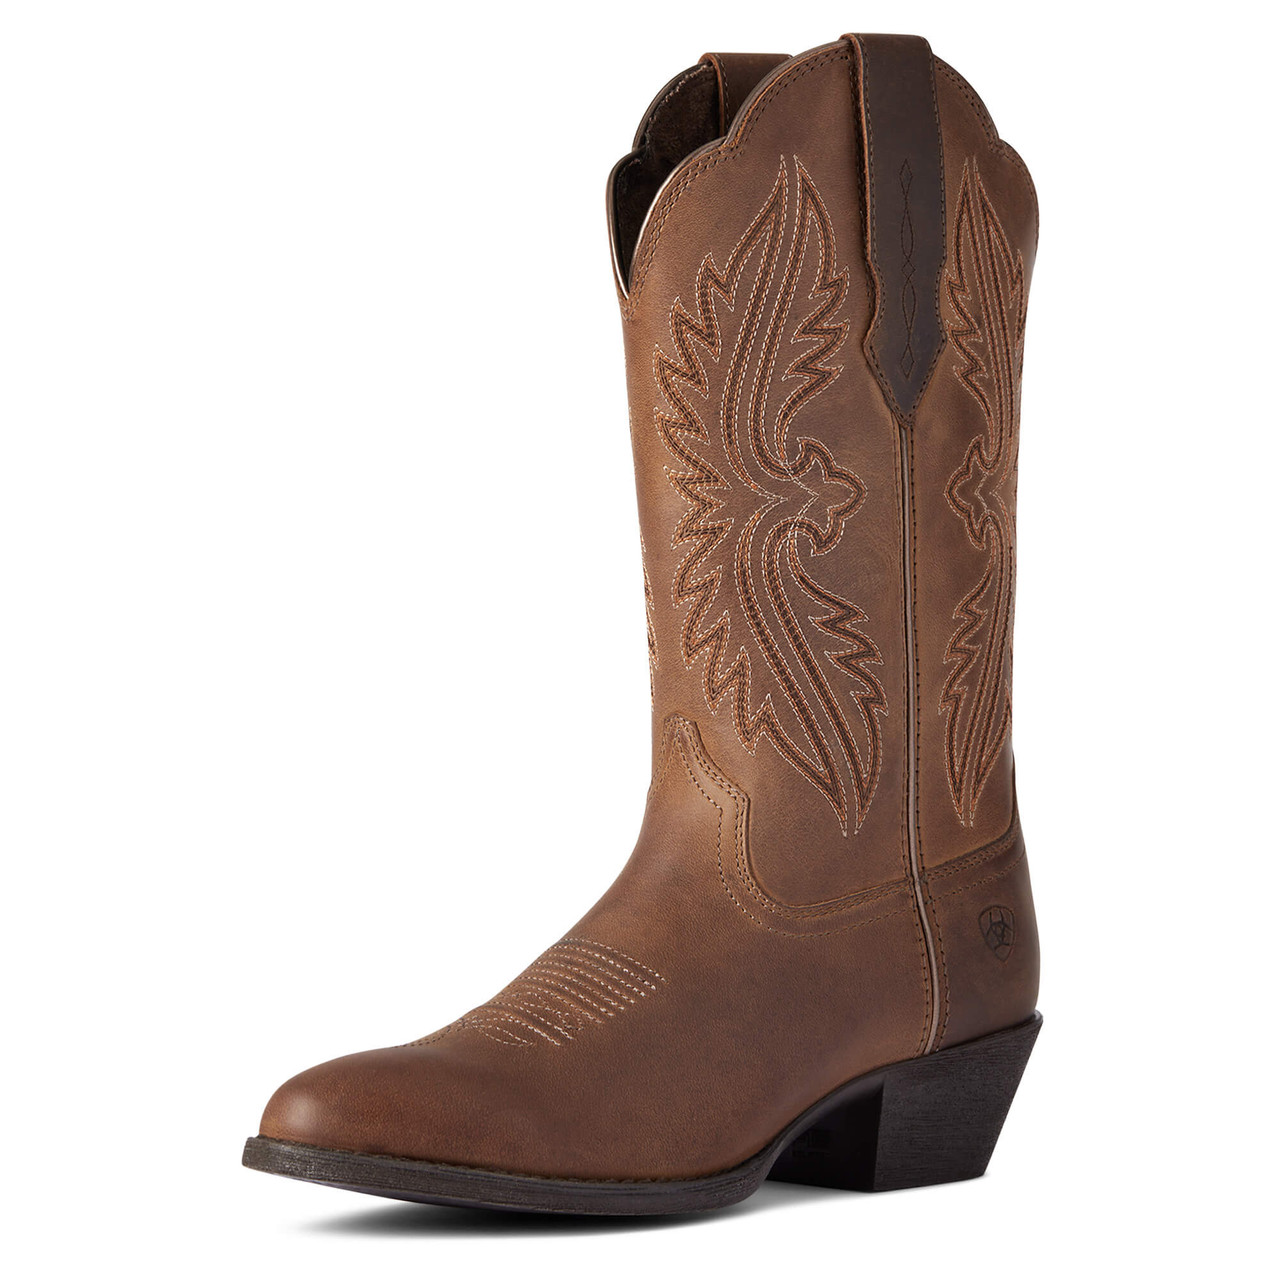 Women's Ariat Heritage R Toe StretchFit Western Boots